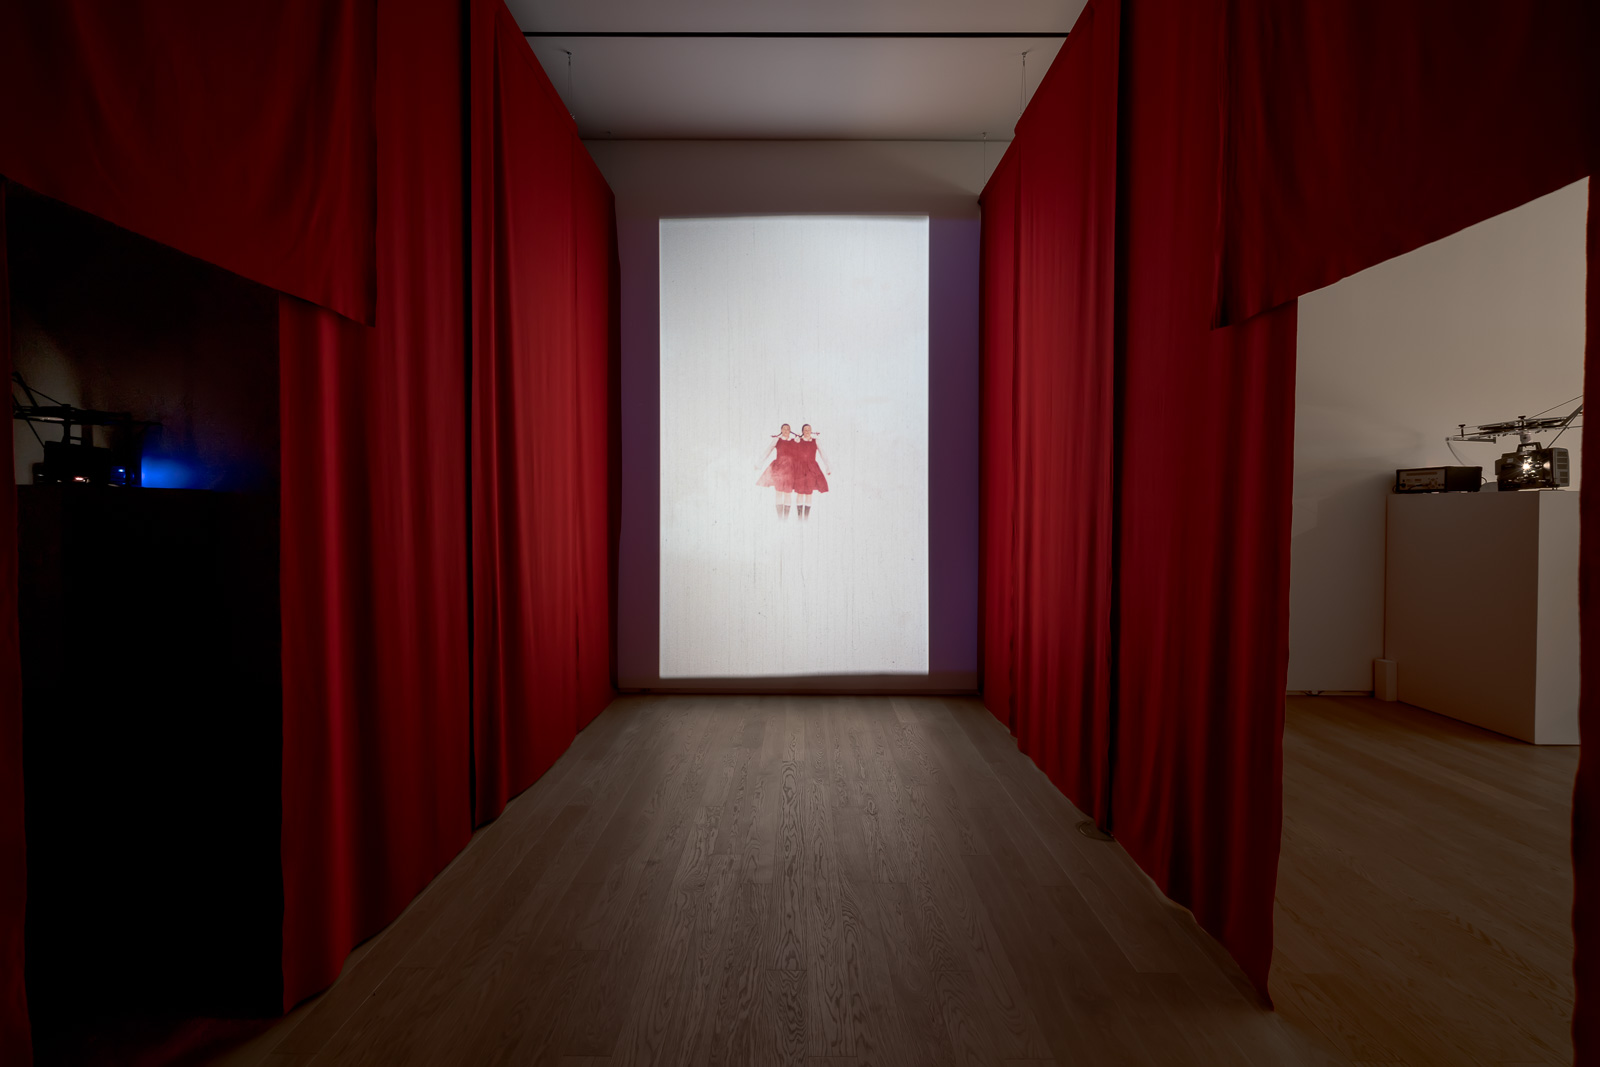 Amelie Atkins and the Diamond Eye Assembly, Installation view, Remai Modern, 2019. Photo: Blaine Campbell